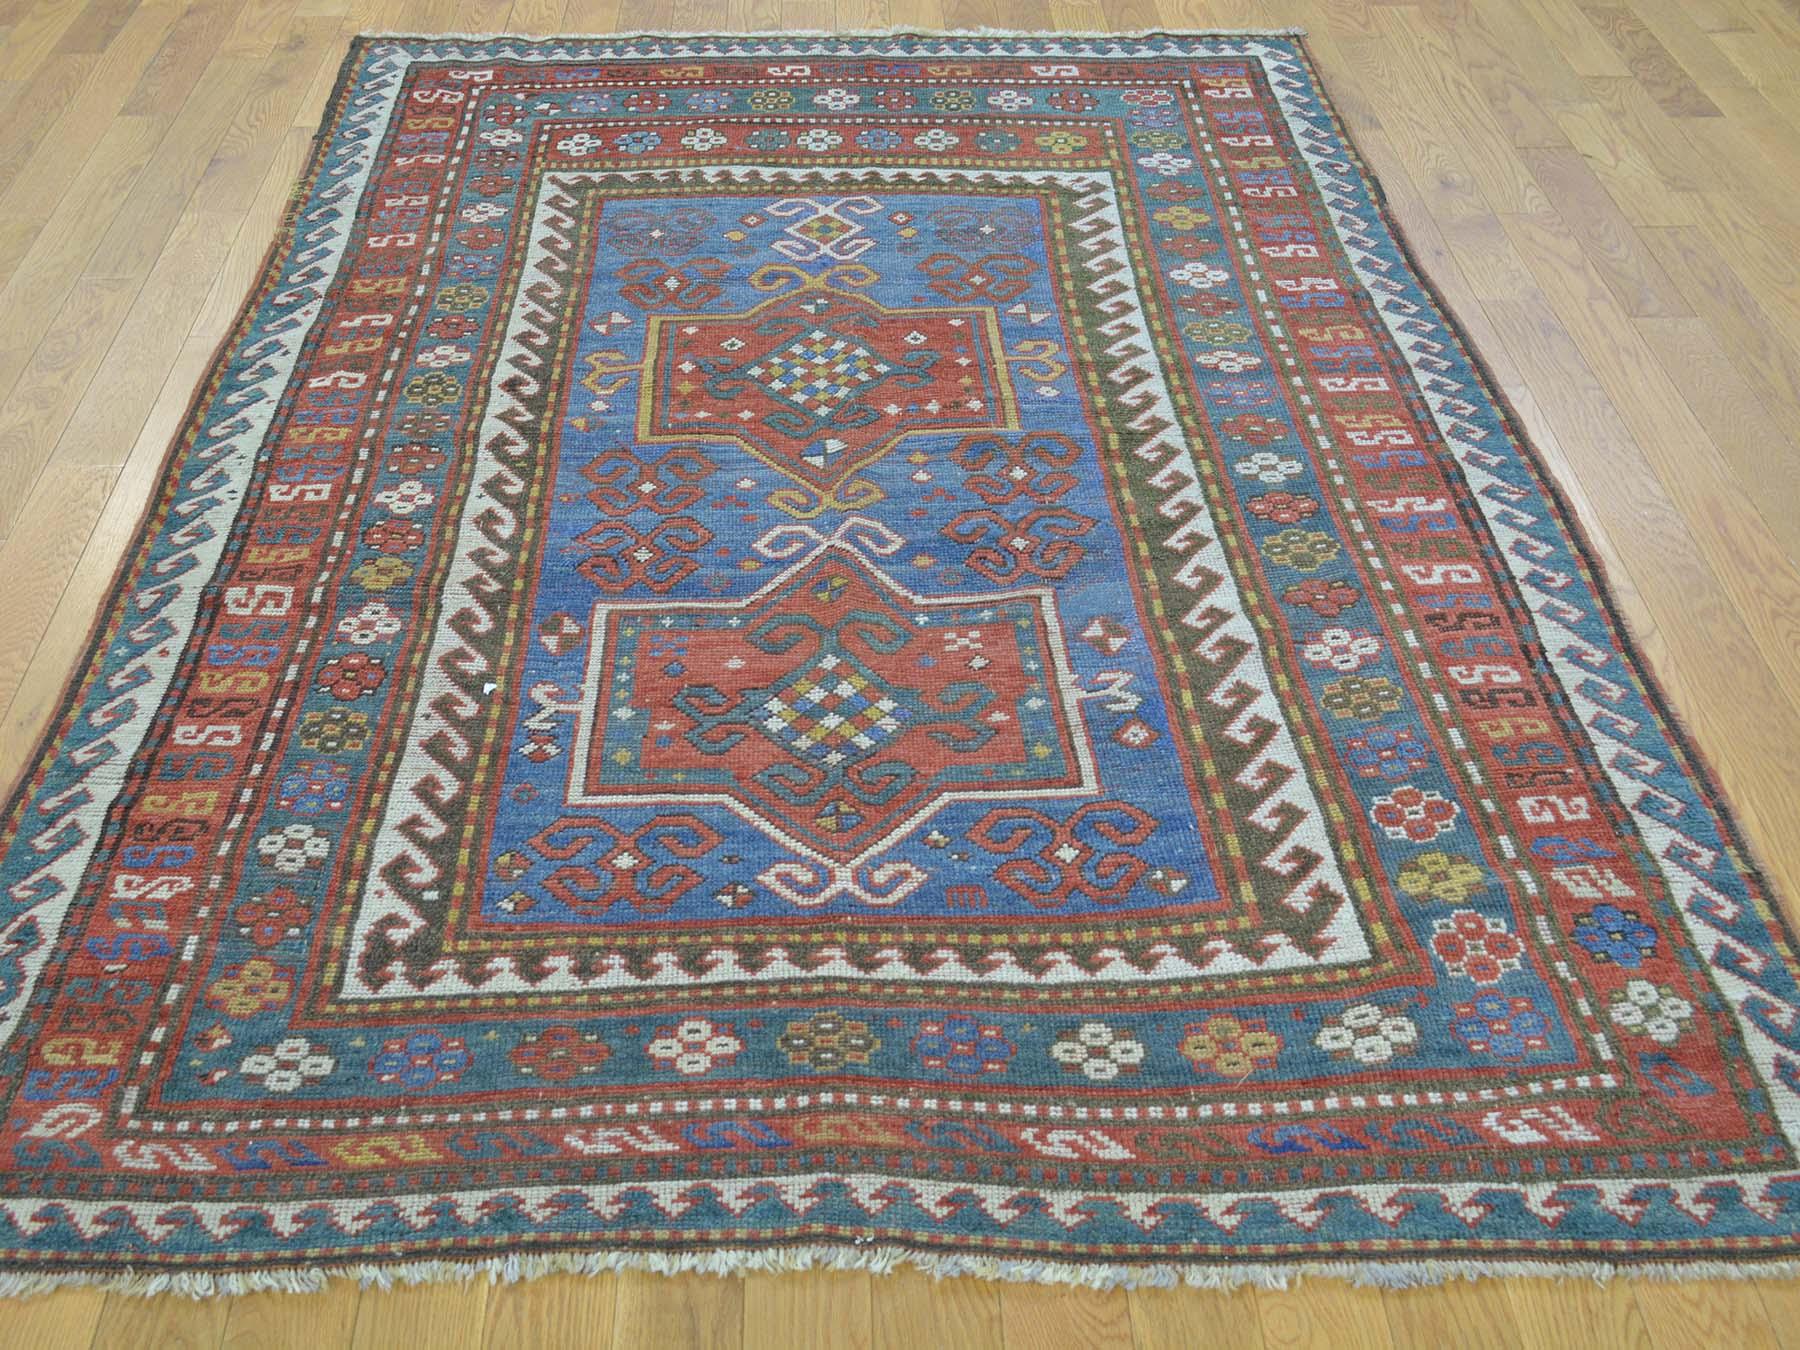 Bring life to your home with this fascinating antique carpet. This handcrafted Caucasian Karachopf is an original excellent condition hand knotted oriental rug. This limited piece has been knotted for months and months in the centuries-old Persian